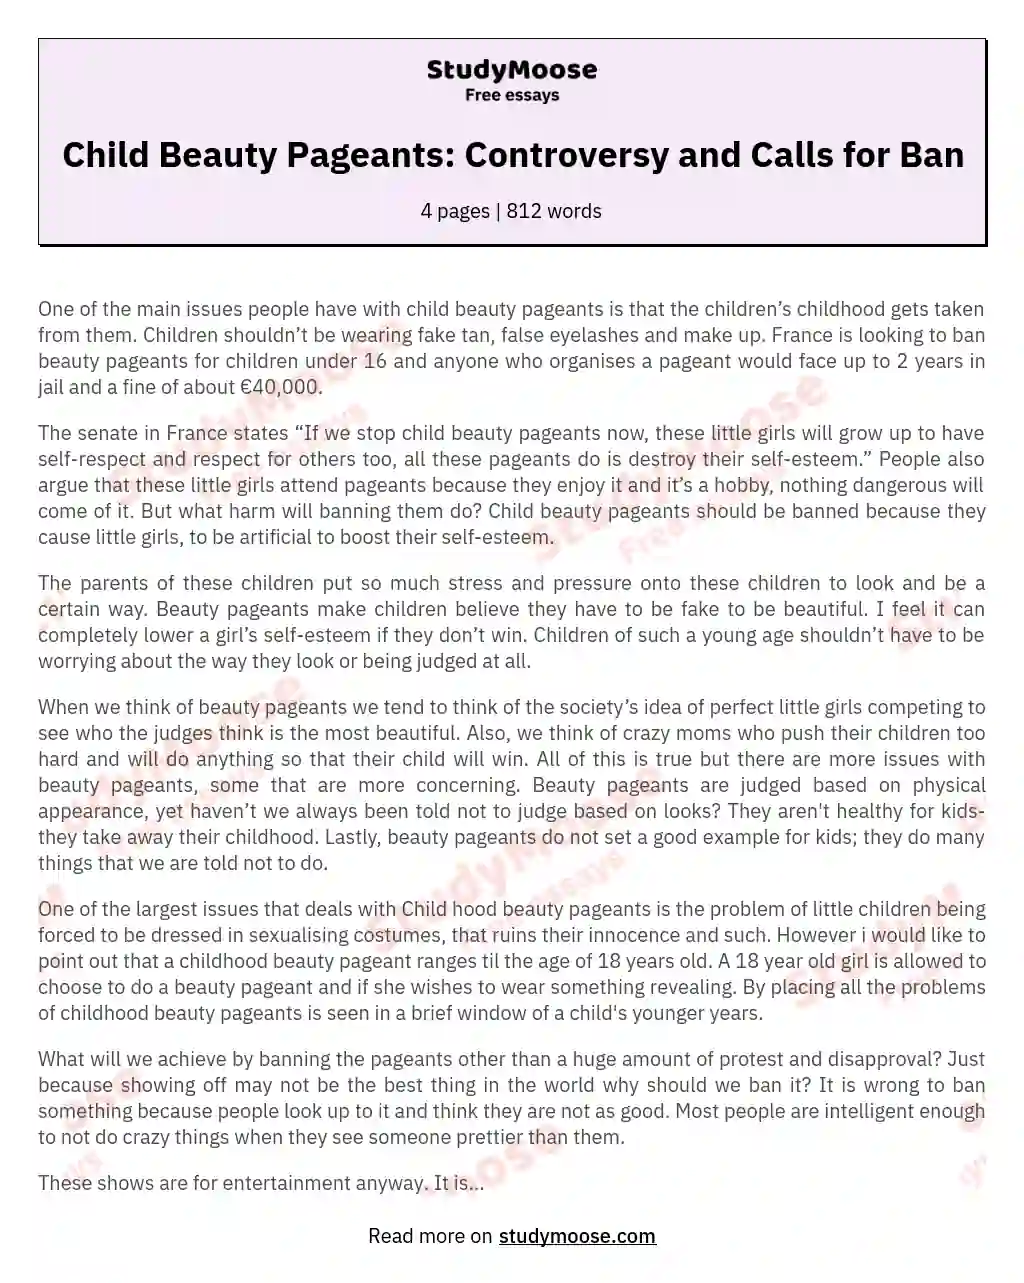 Child Beauty Pageants: Controversy and Calls for Ban essay